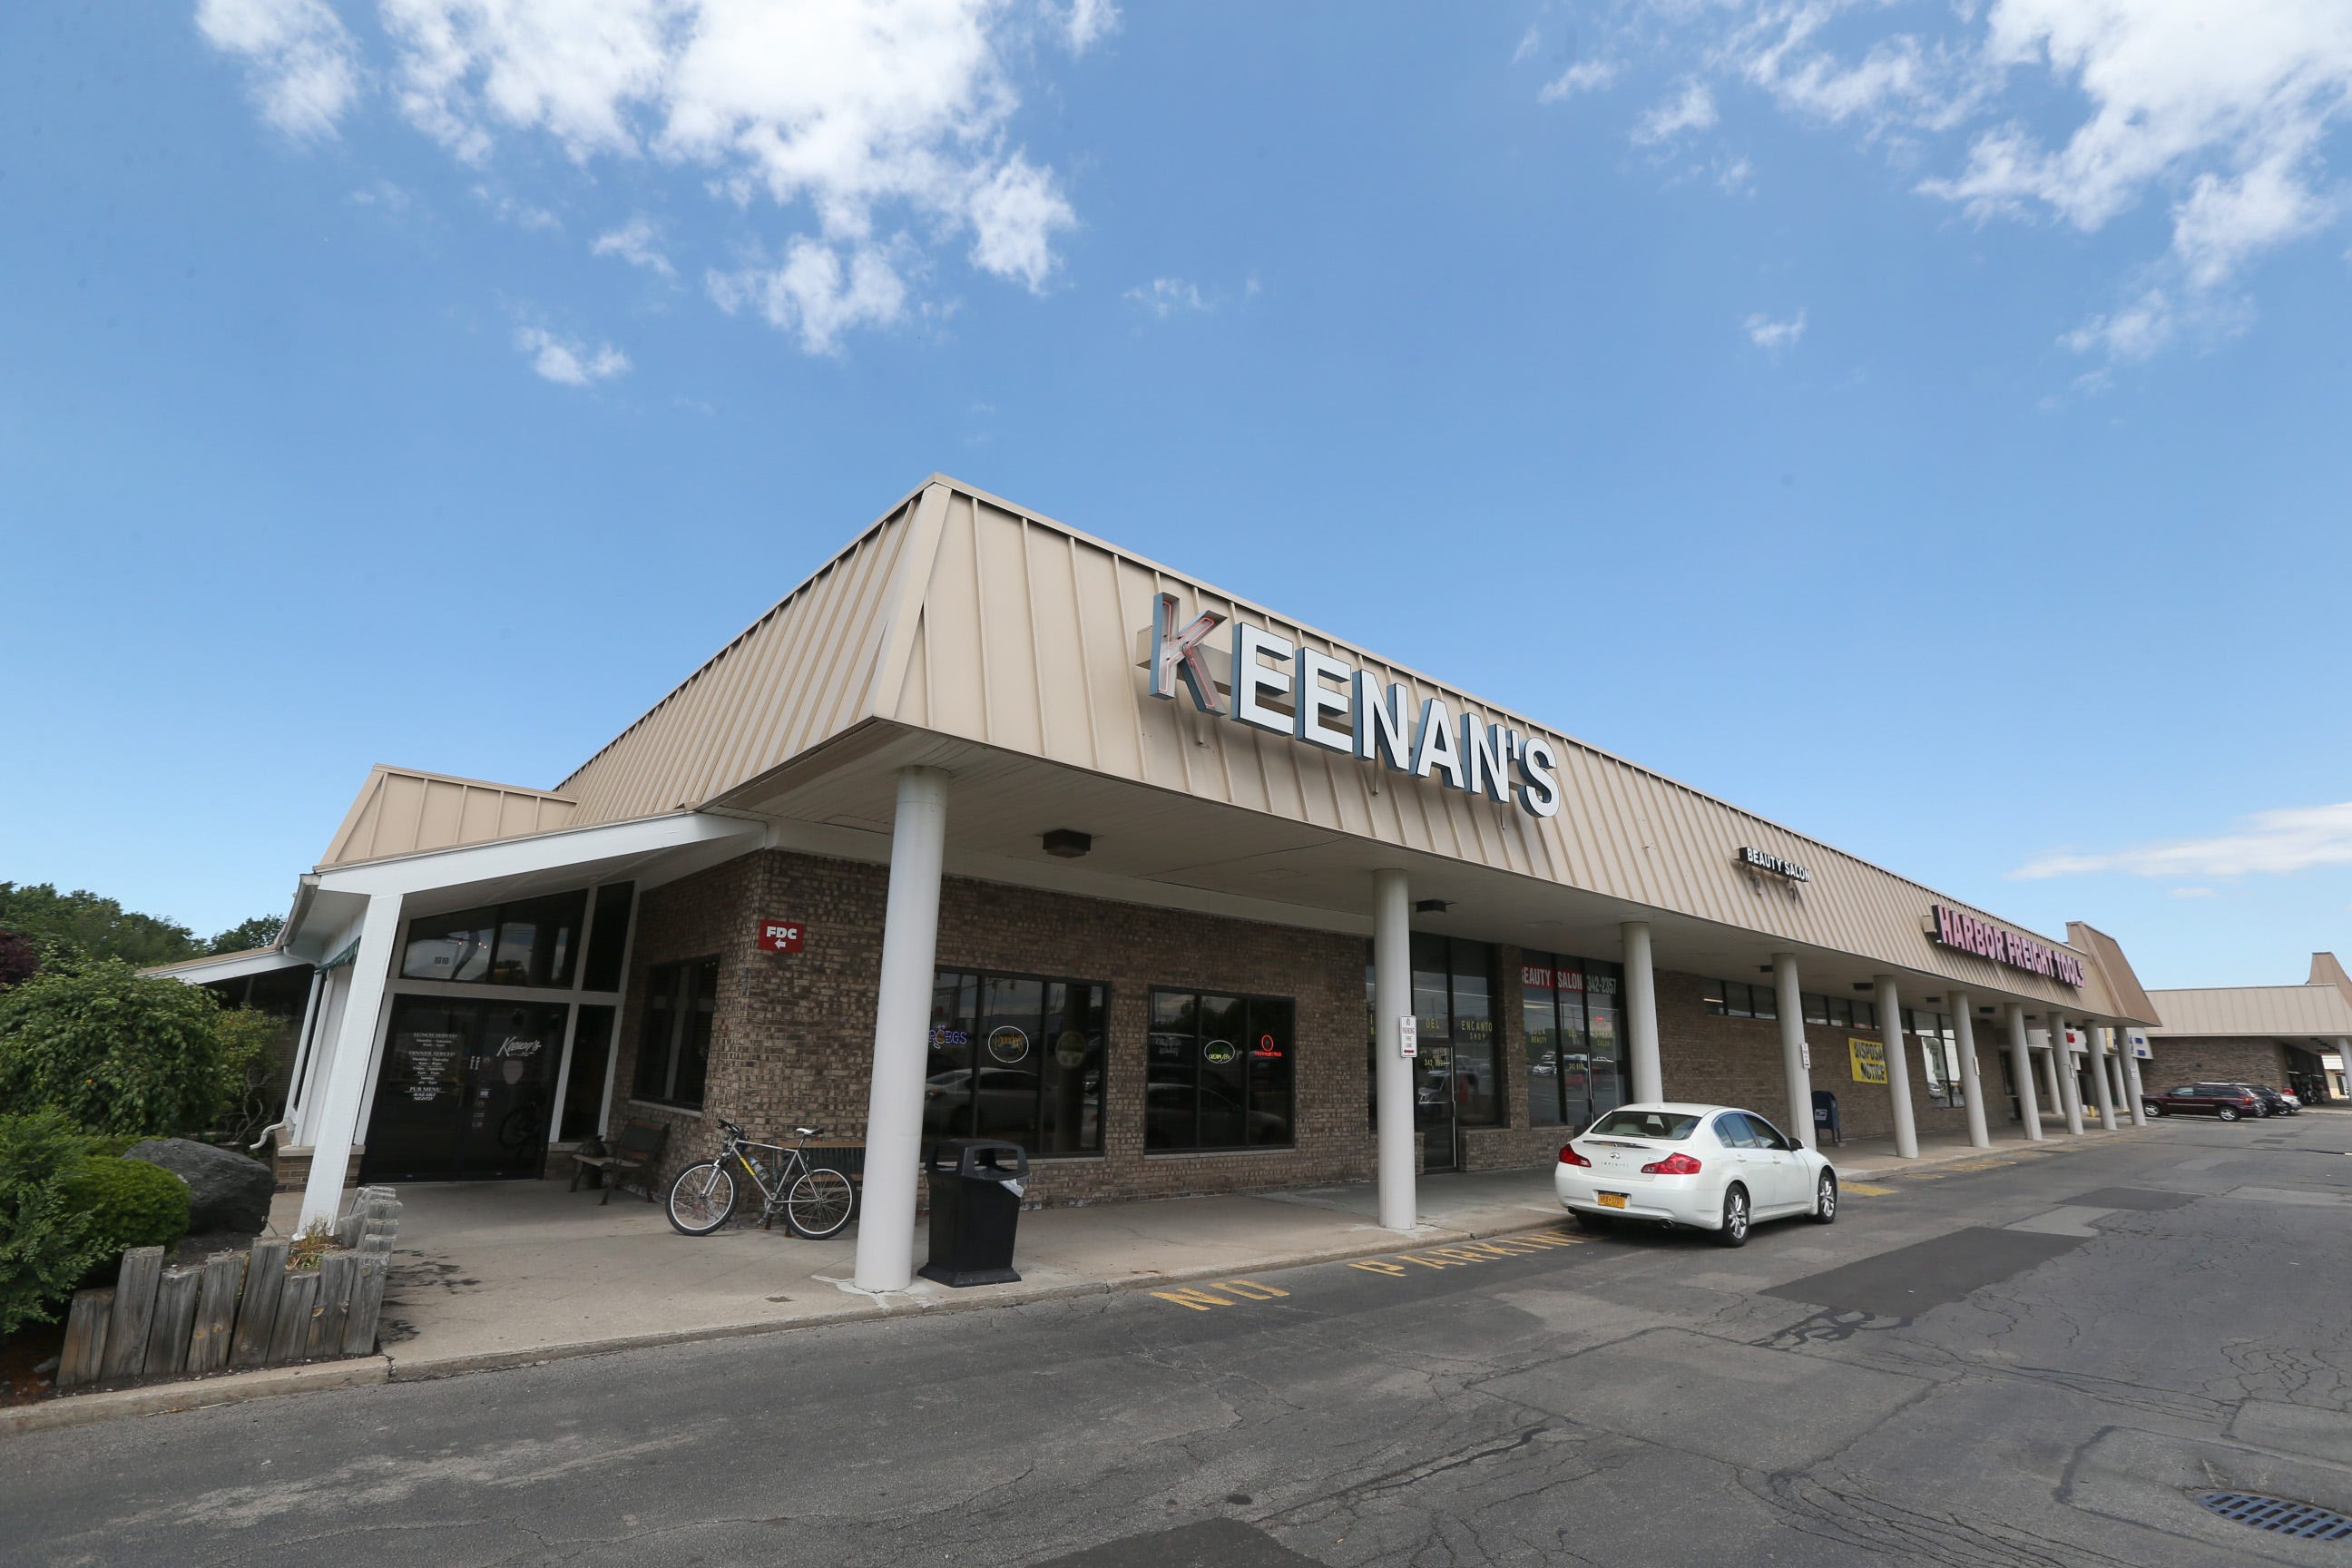 Keenan's Restaurant in Irondequoit to close June 30 after 31 years